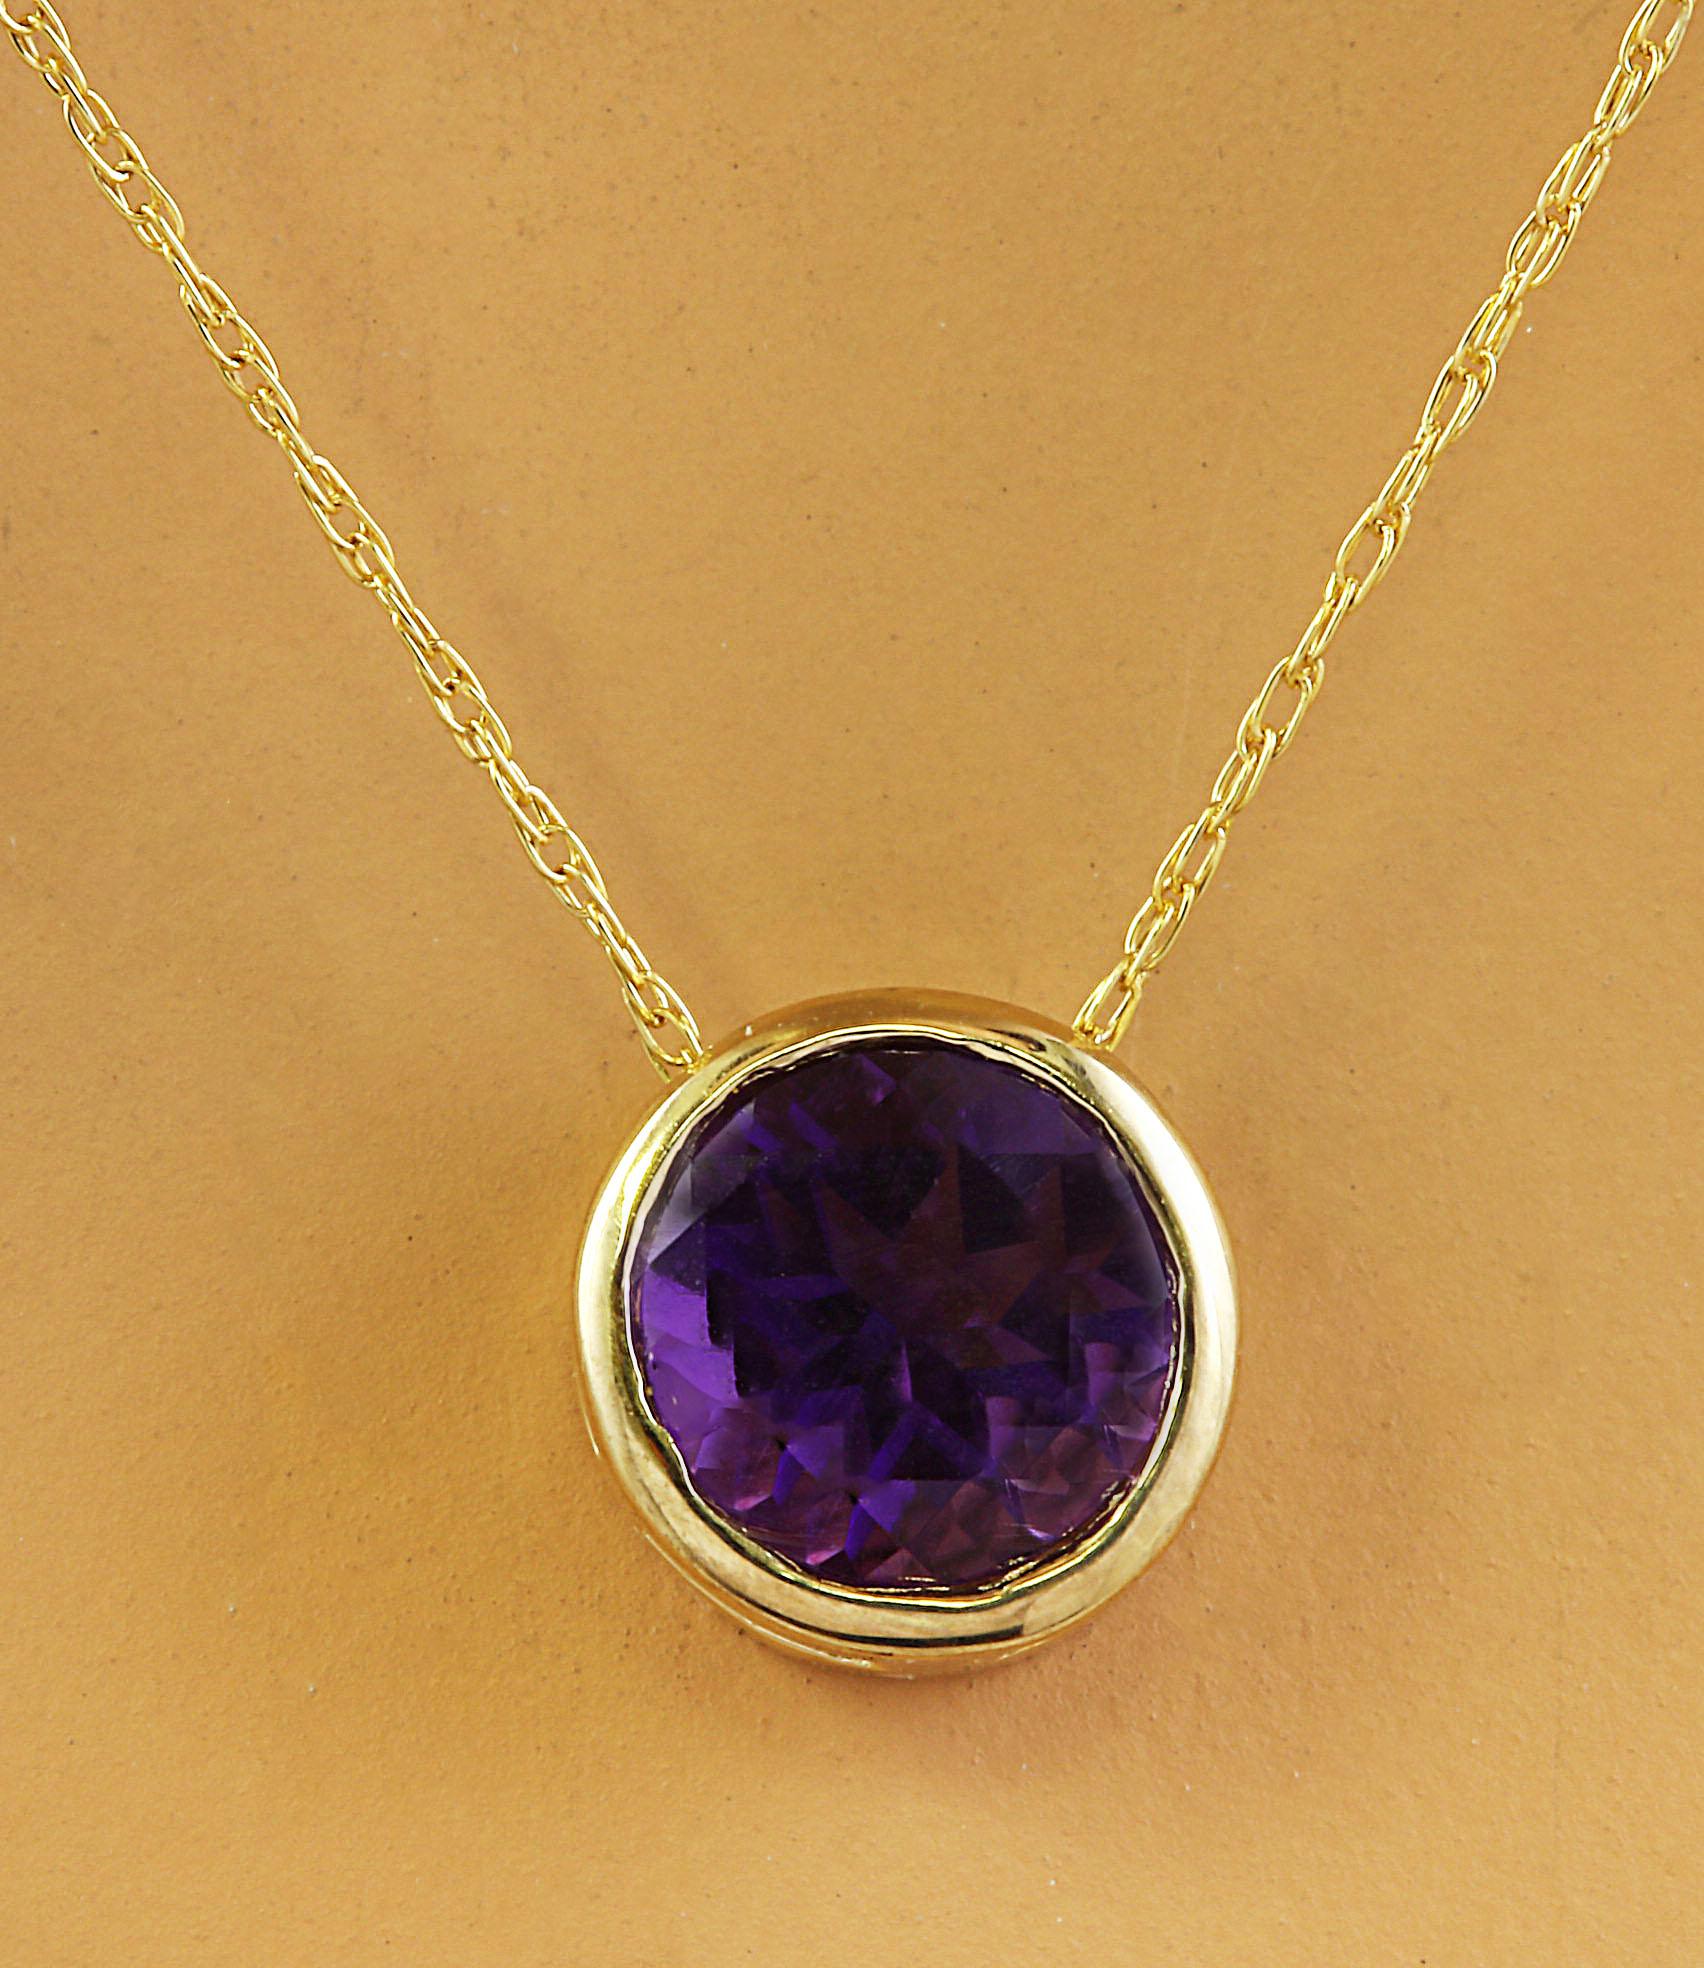 1.50 Carat Amethyst 14K Yellow Gold Necklace
Stamped: 14K
Total Necklace Weight: 1.4 Grams
Length: 16 Inches
Amethyst Weight: 1.50 Carat (6.50x6.50 Millimeters) 
Face Measures: 8.20x8.20 Millimeter 
SKU: [600189]